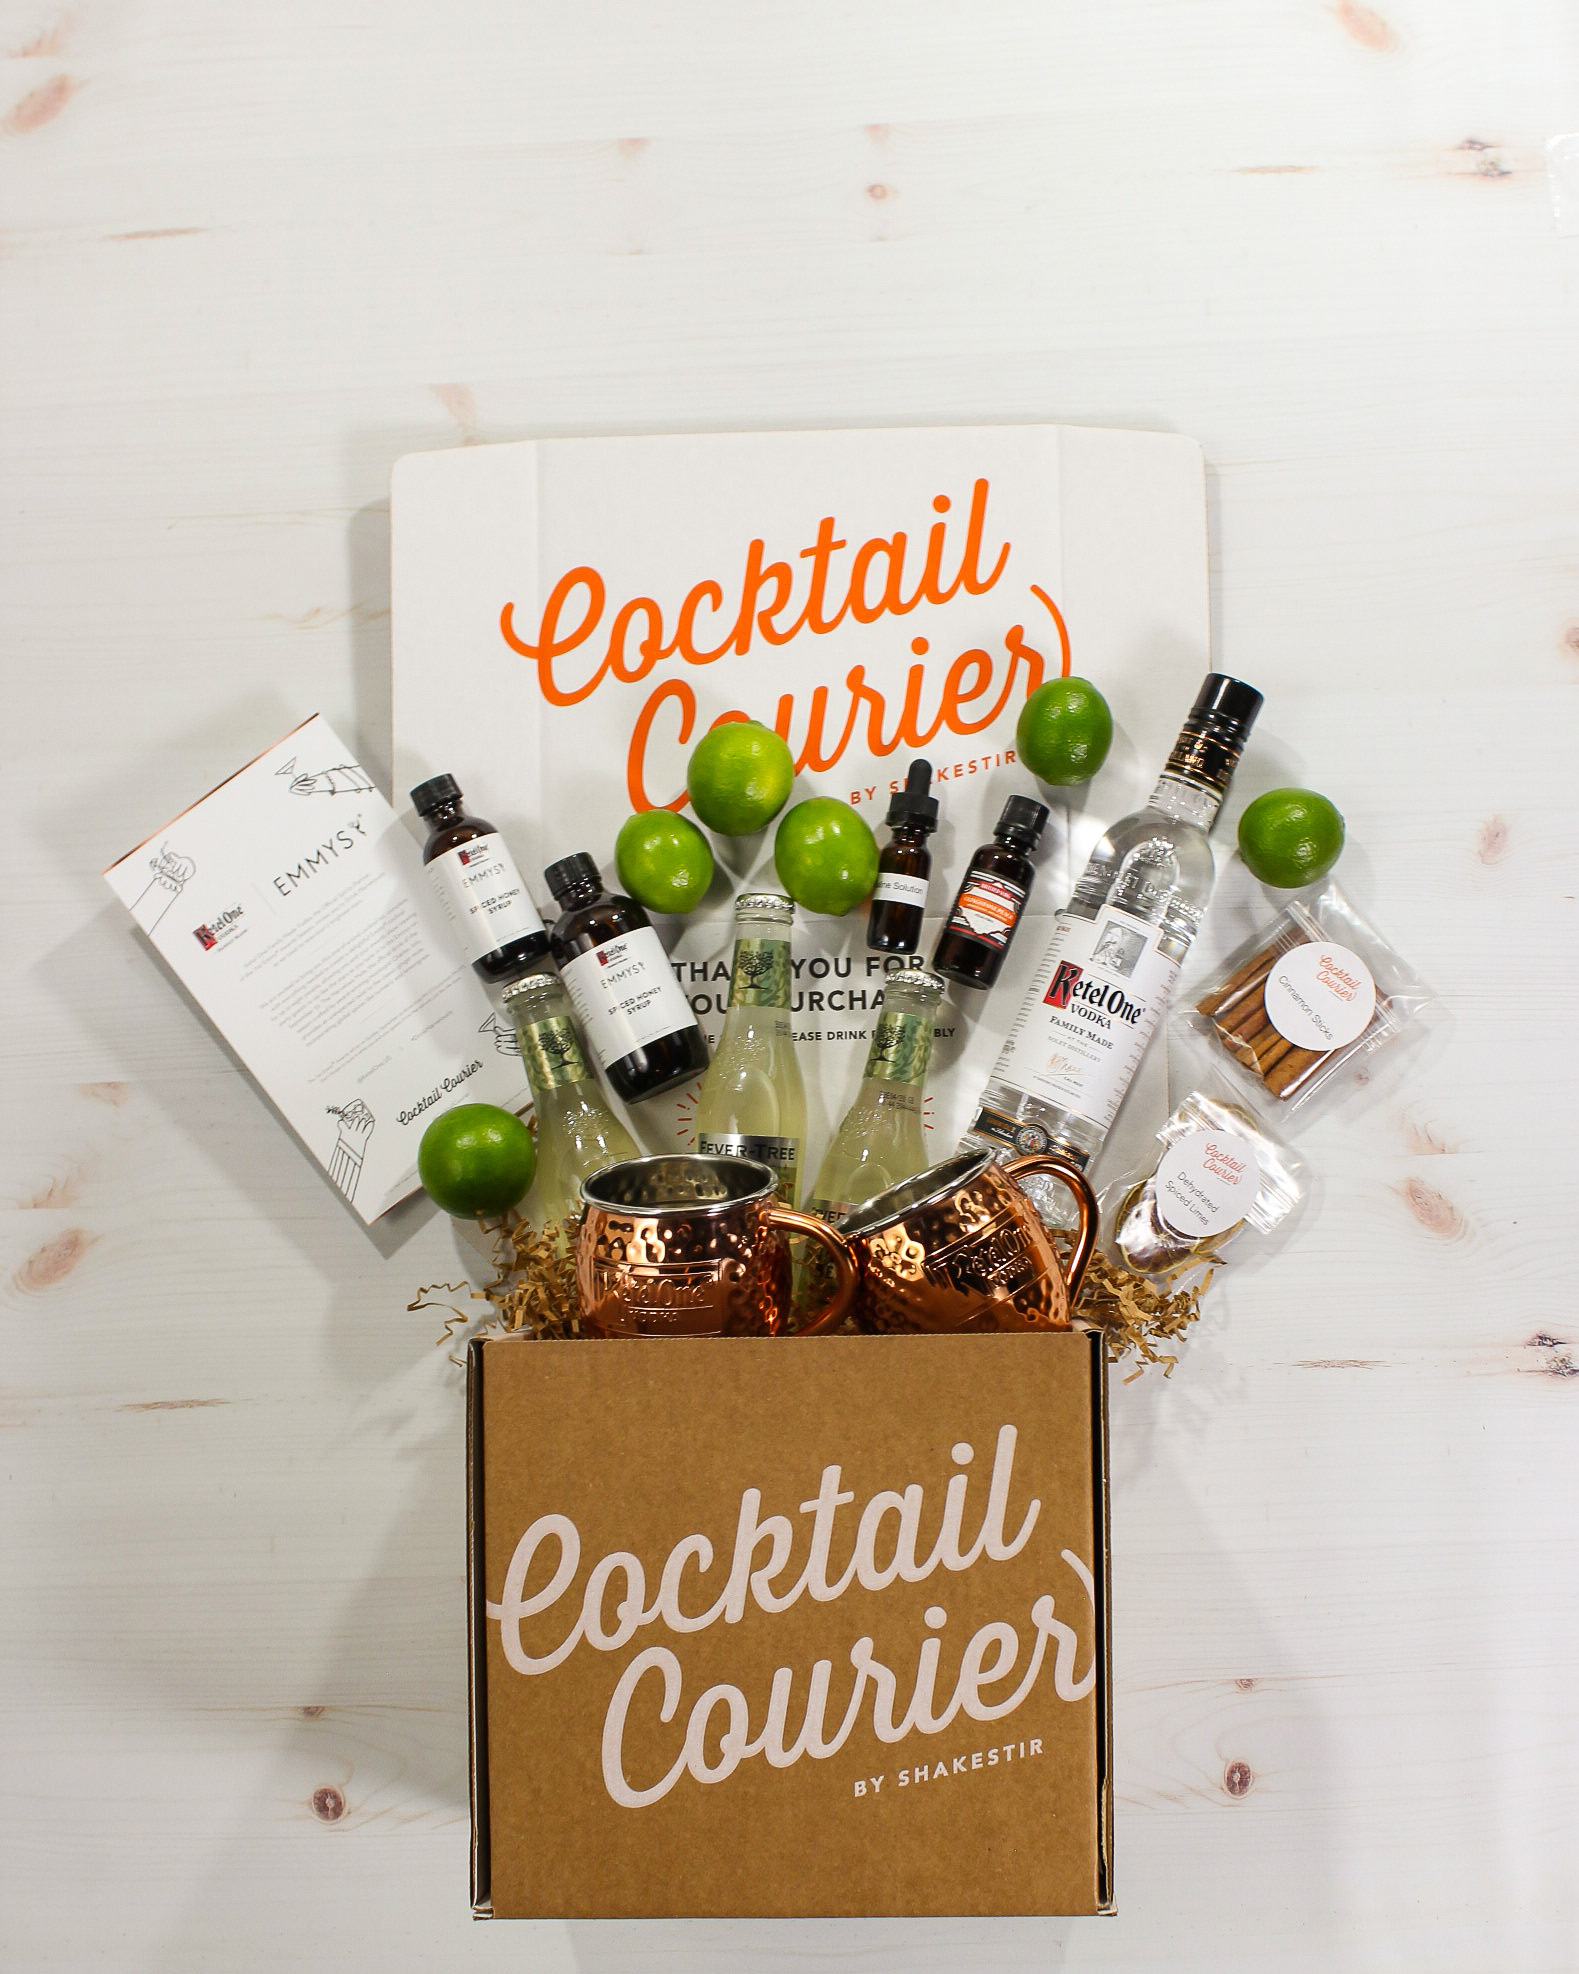 To bring the spectacular cocktail experience to consumers nationwide, Ketel One partnered with home delivery service Cocktail Courier to create a bespoke Emmy Awards cocktail kit, complete with everything needed to create eight Marvelous Mules at home